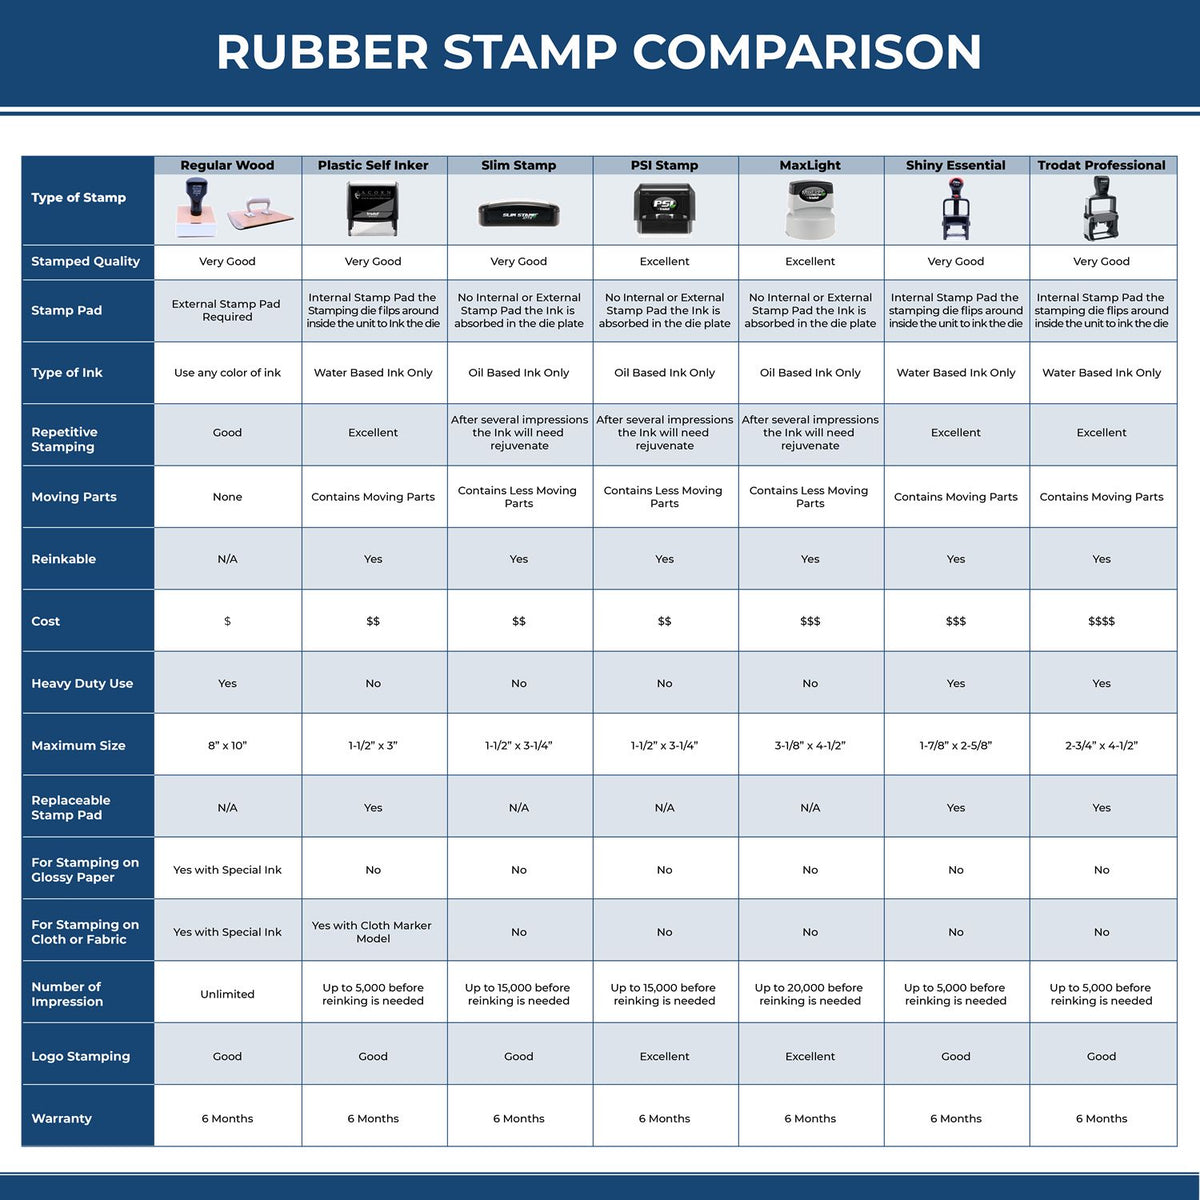 Large Past Due Rubber Stamp 4141R Rubber Stamp Comparison